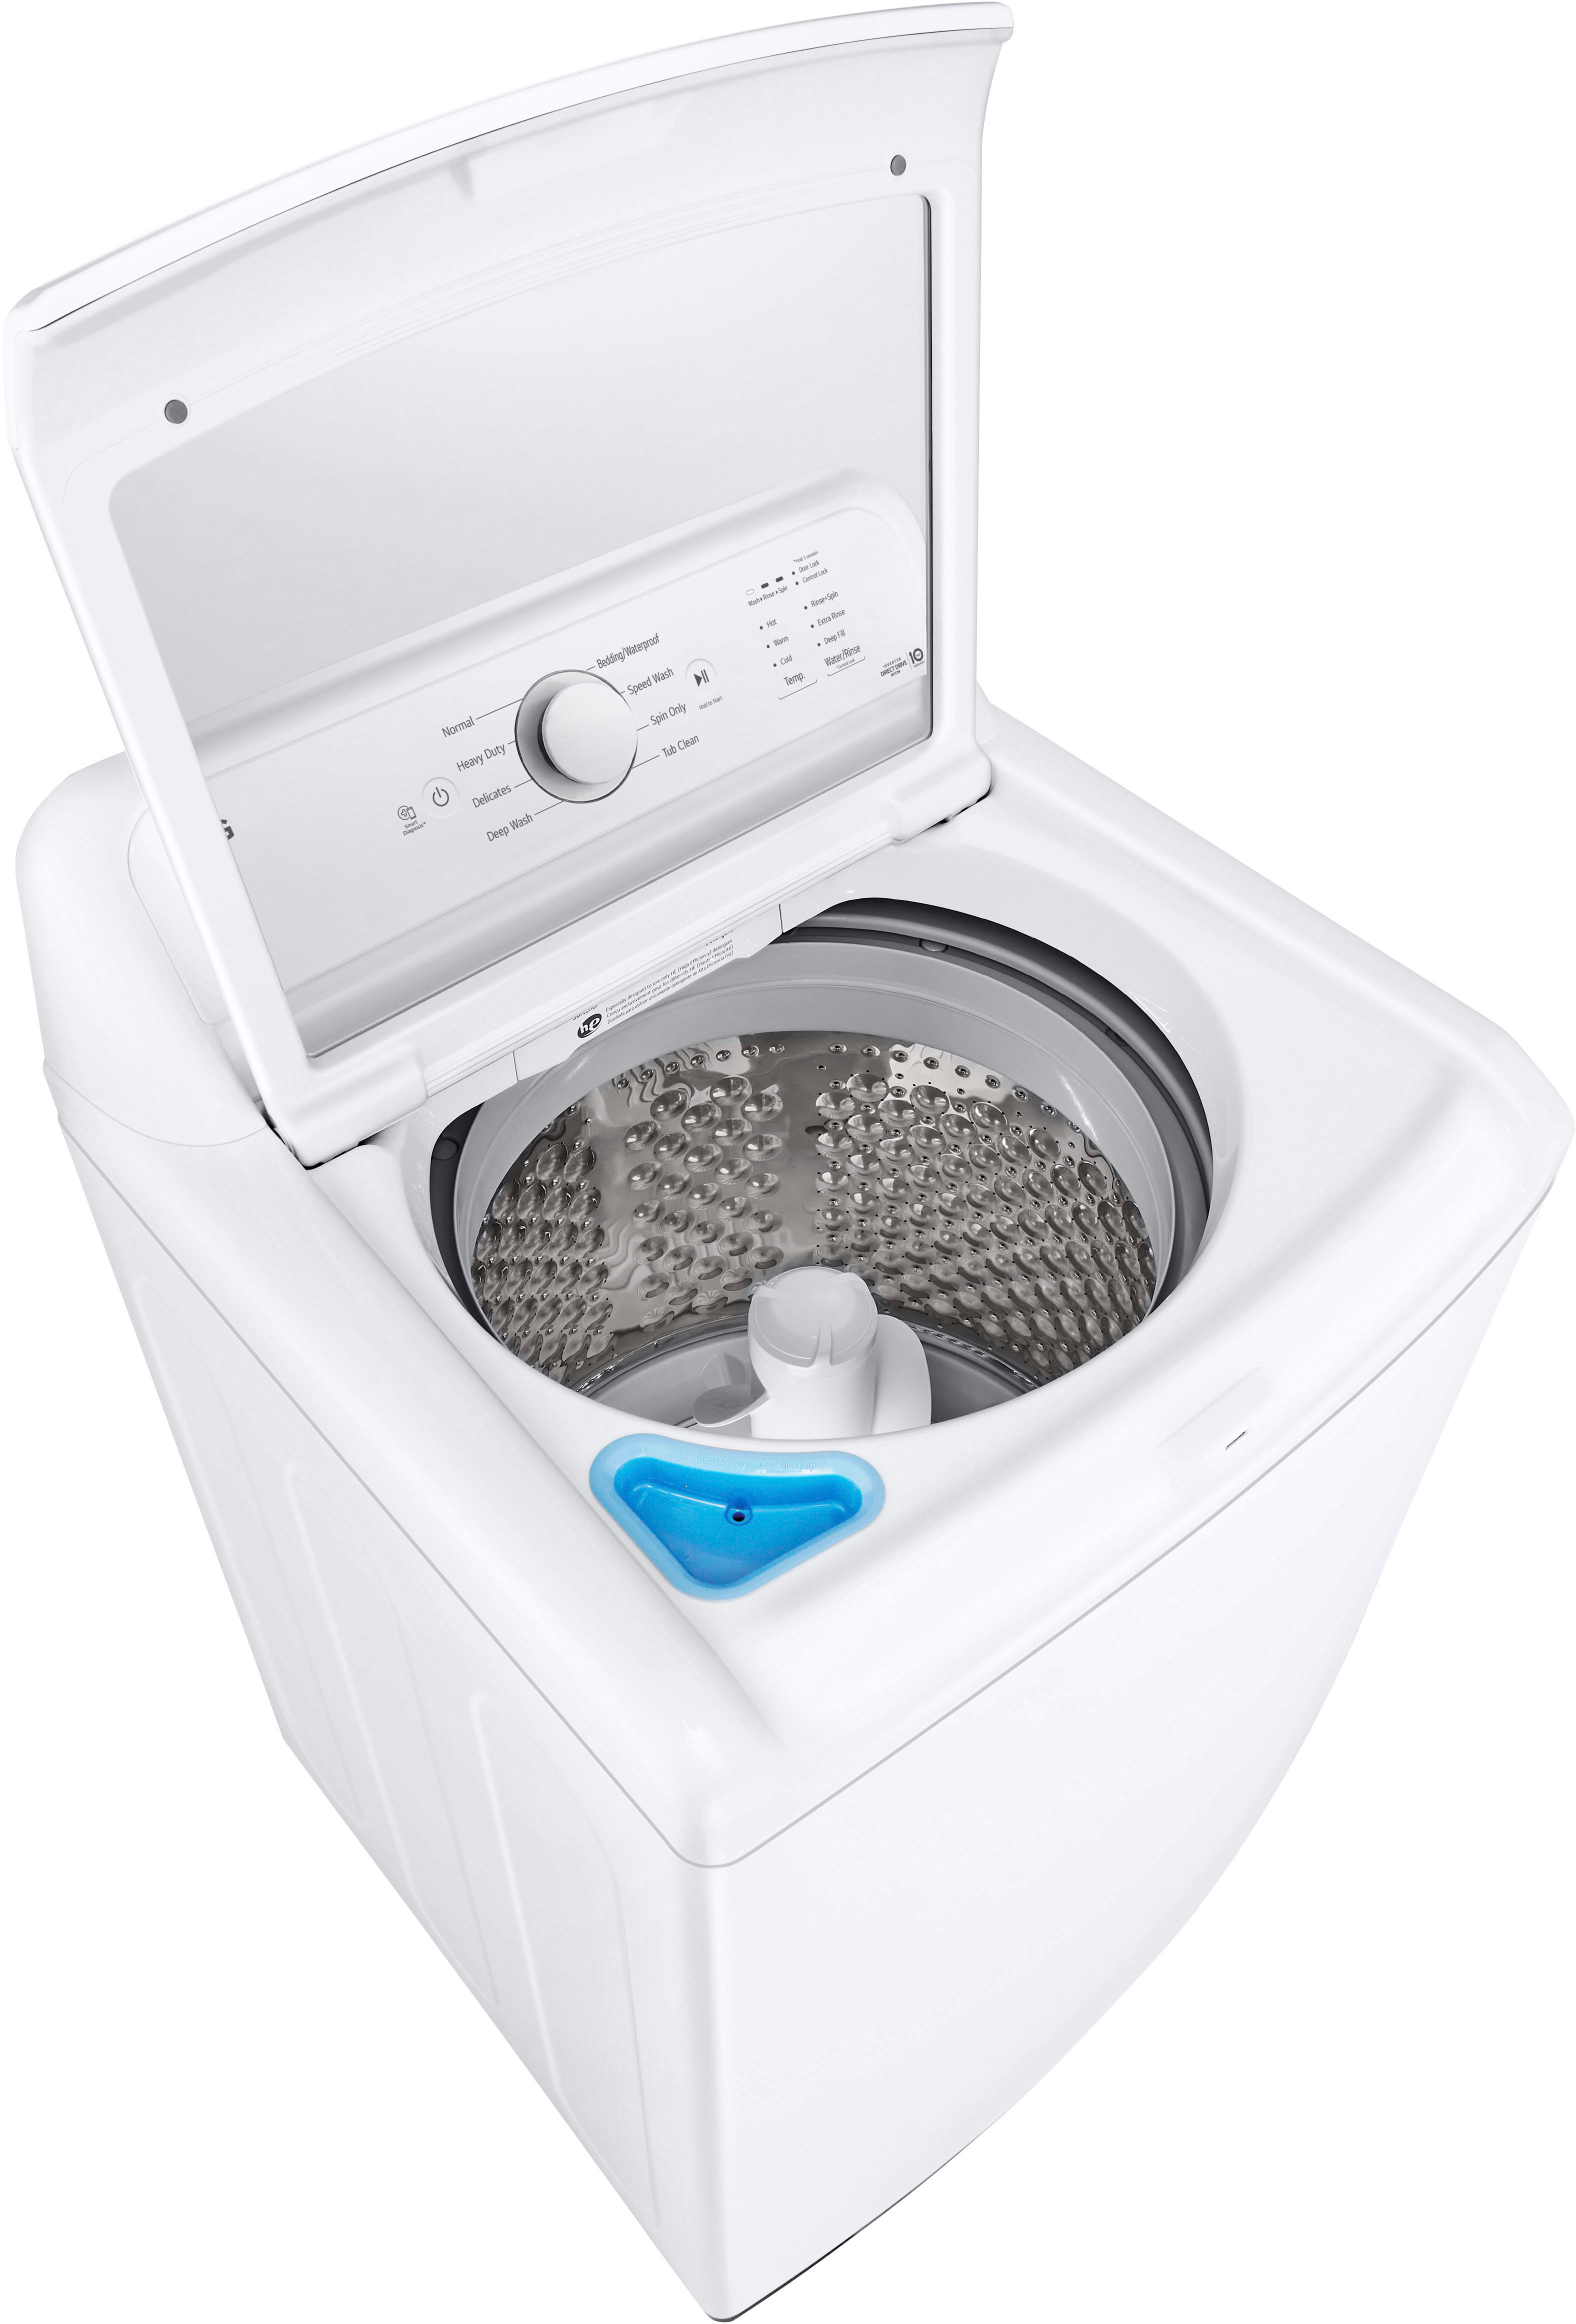 LG 4.1 Cu. with Glass WT6105CW - Buy SlamProof Top Washer Ft. Load Lid White Best